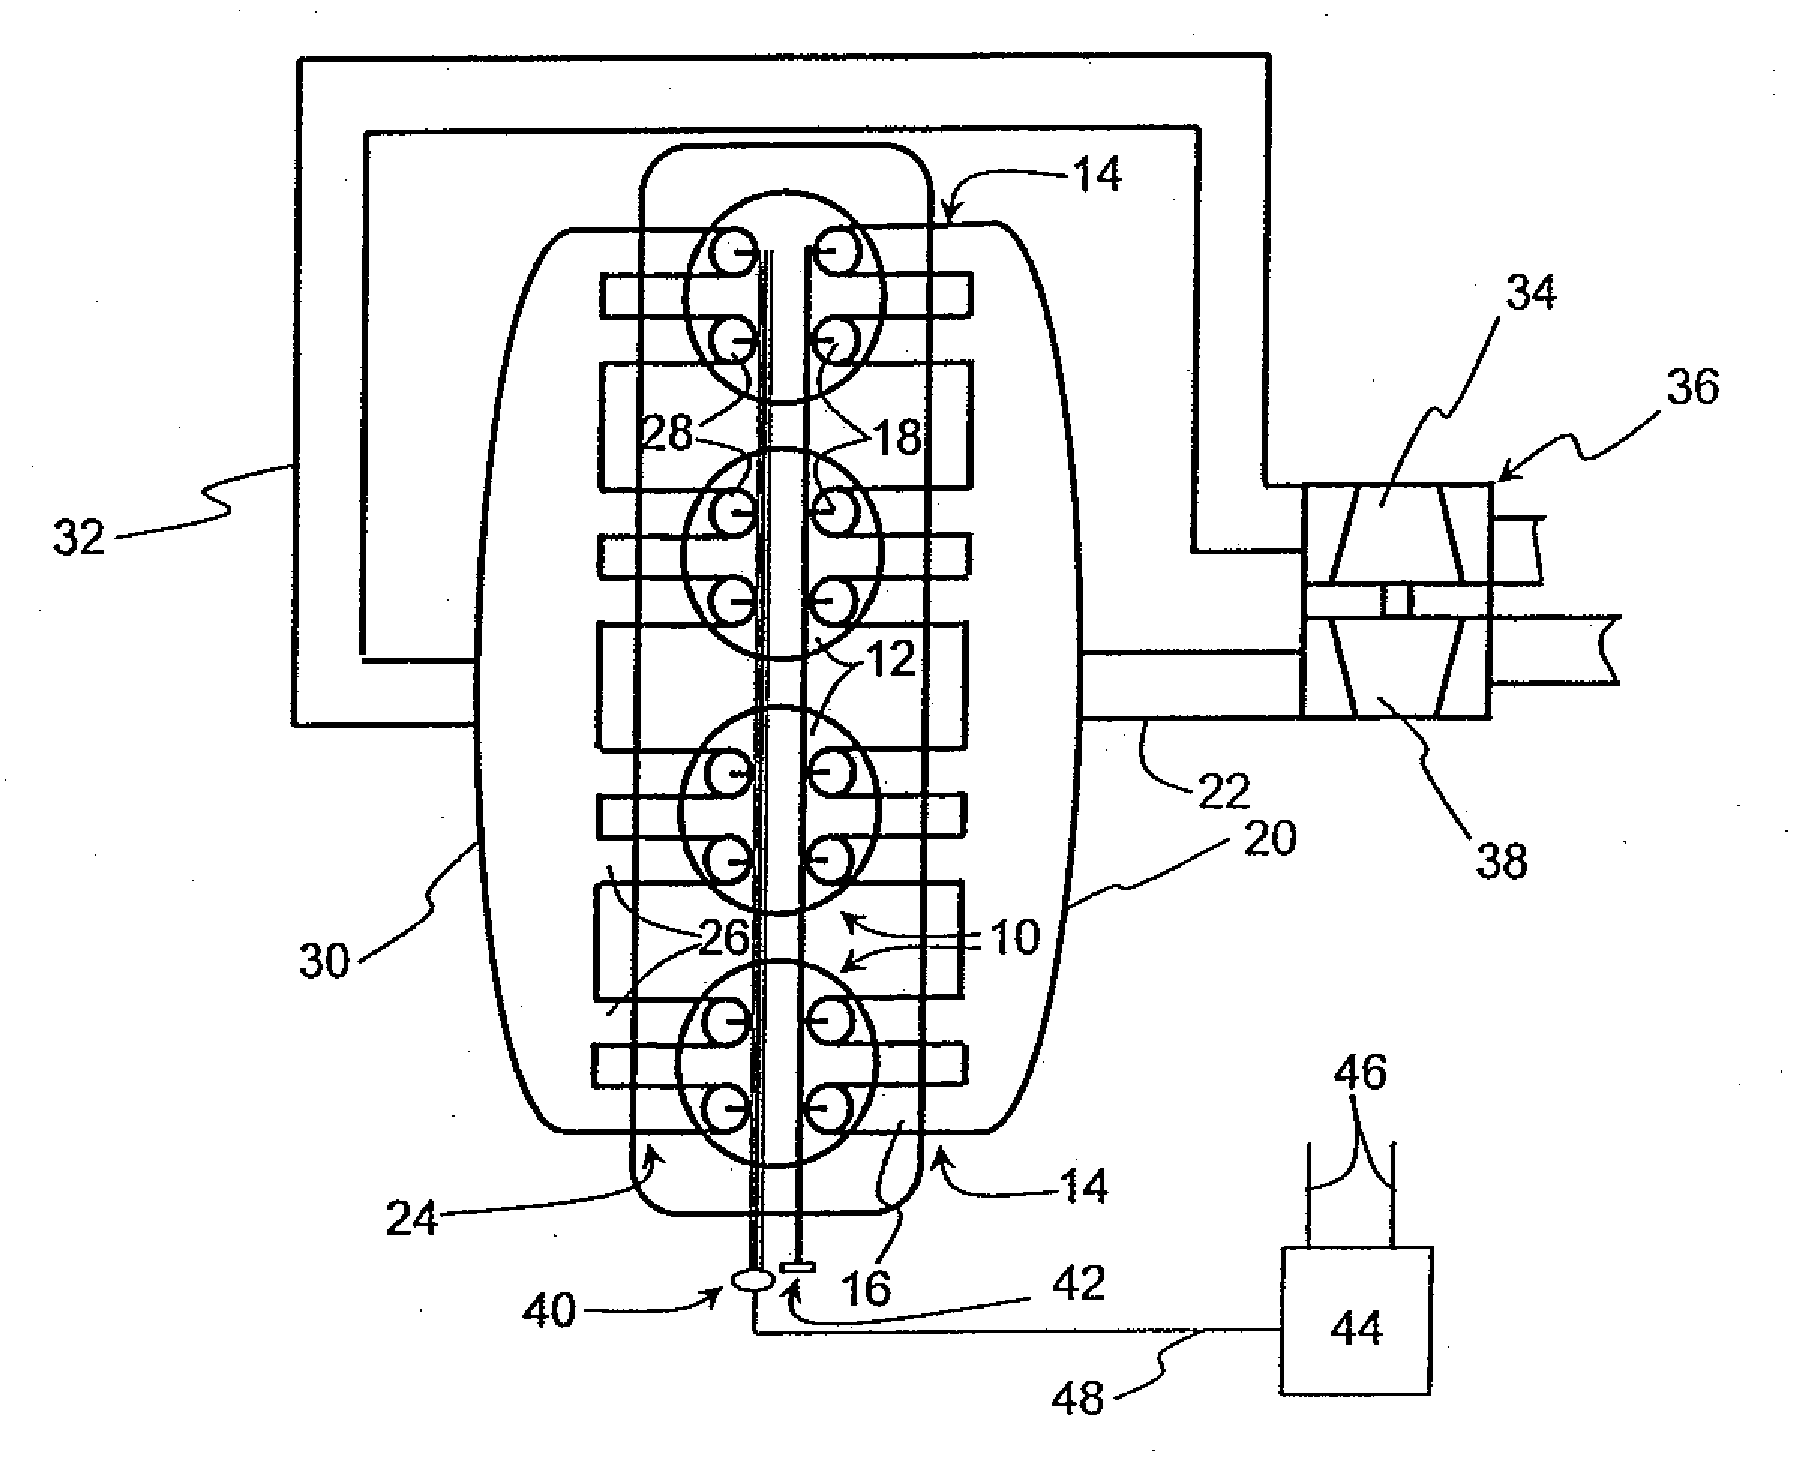 Residual burnt gas scavenging method with double intake valve lift in a direct-injection supercharged internal-combusion engine, notably of diesel type